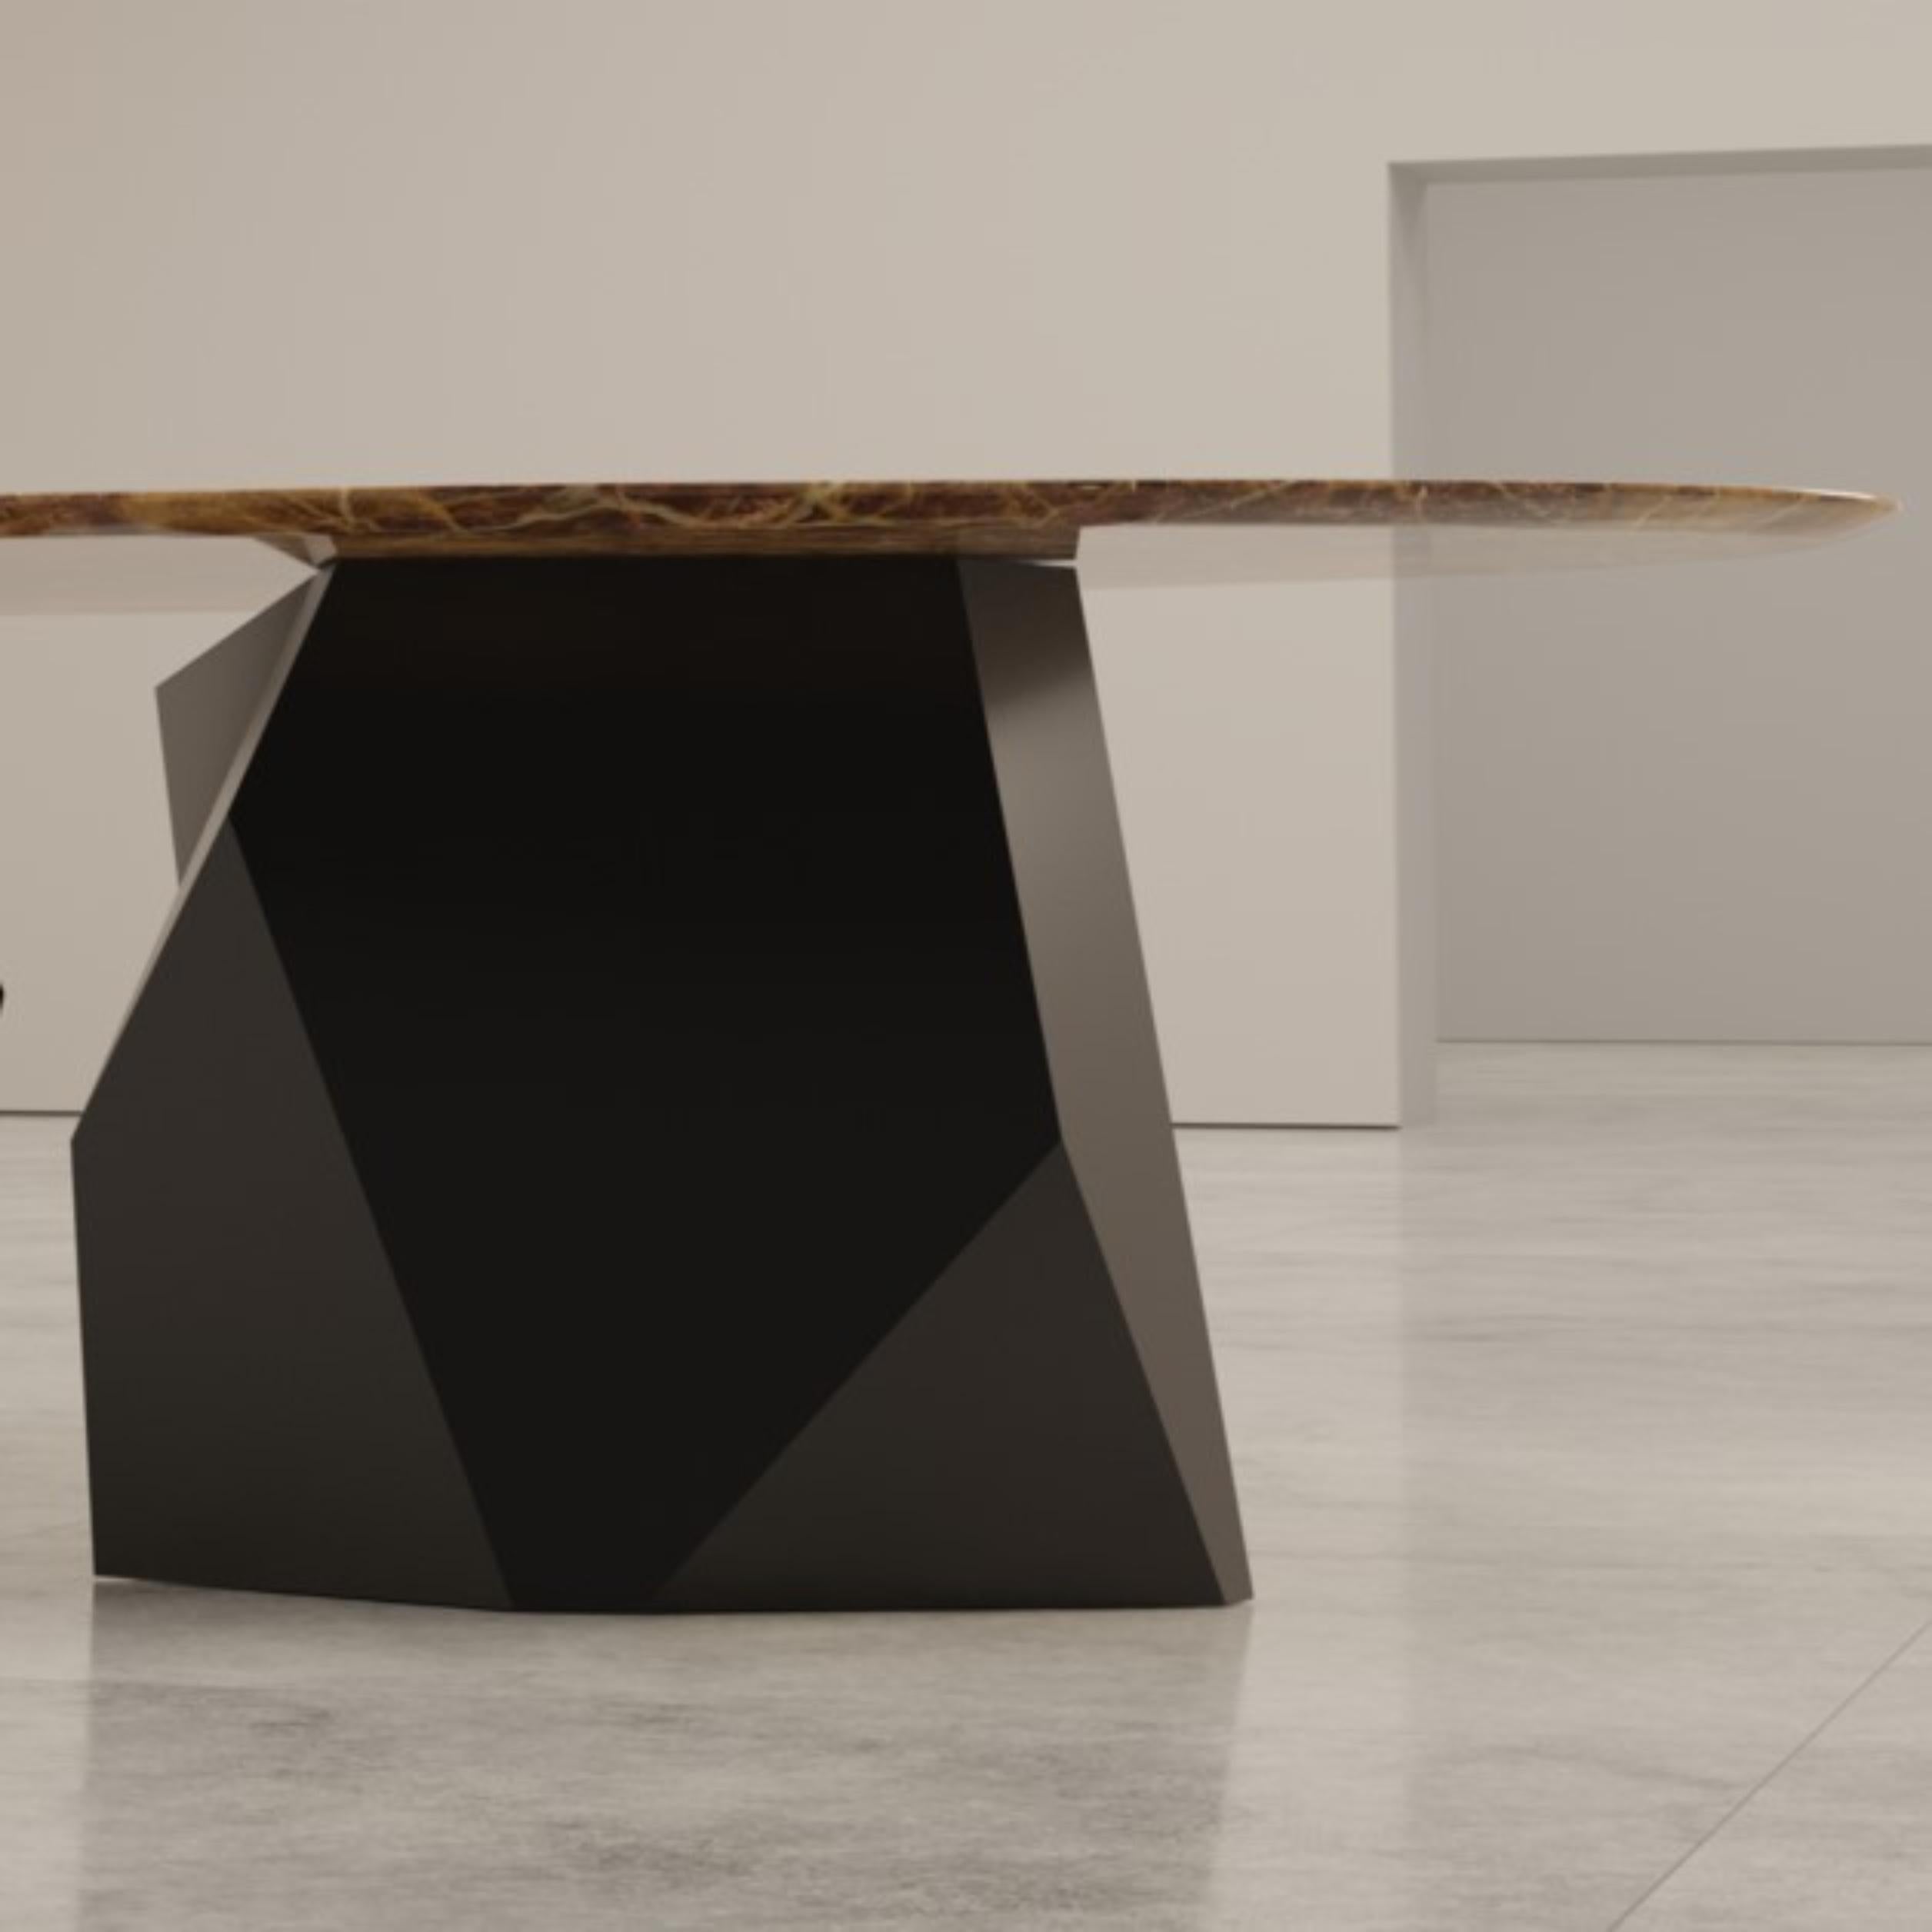 Chronos dining table by Duffy London
Dimensions: W 300 x D 140 x H 75 cm
Materials: marble, steel

Available in the following finishes:

Base sections: 
Mirror-polished stainless steel in silver, rose-gold, gold, metallic blue or red
Brushed